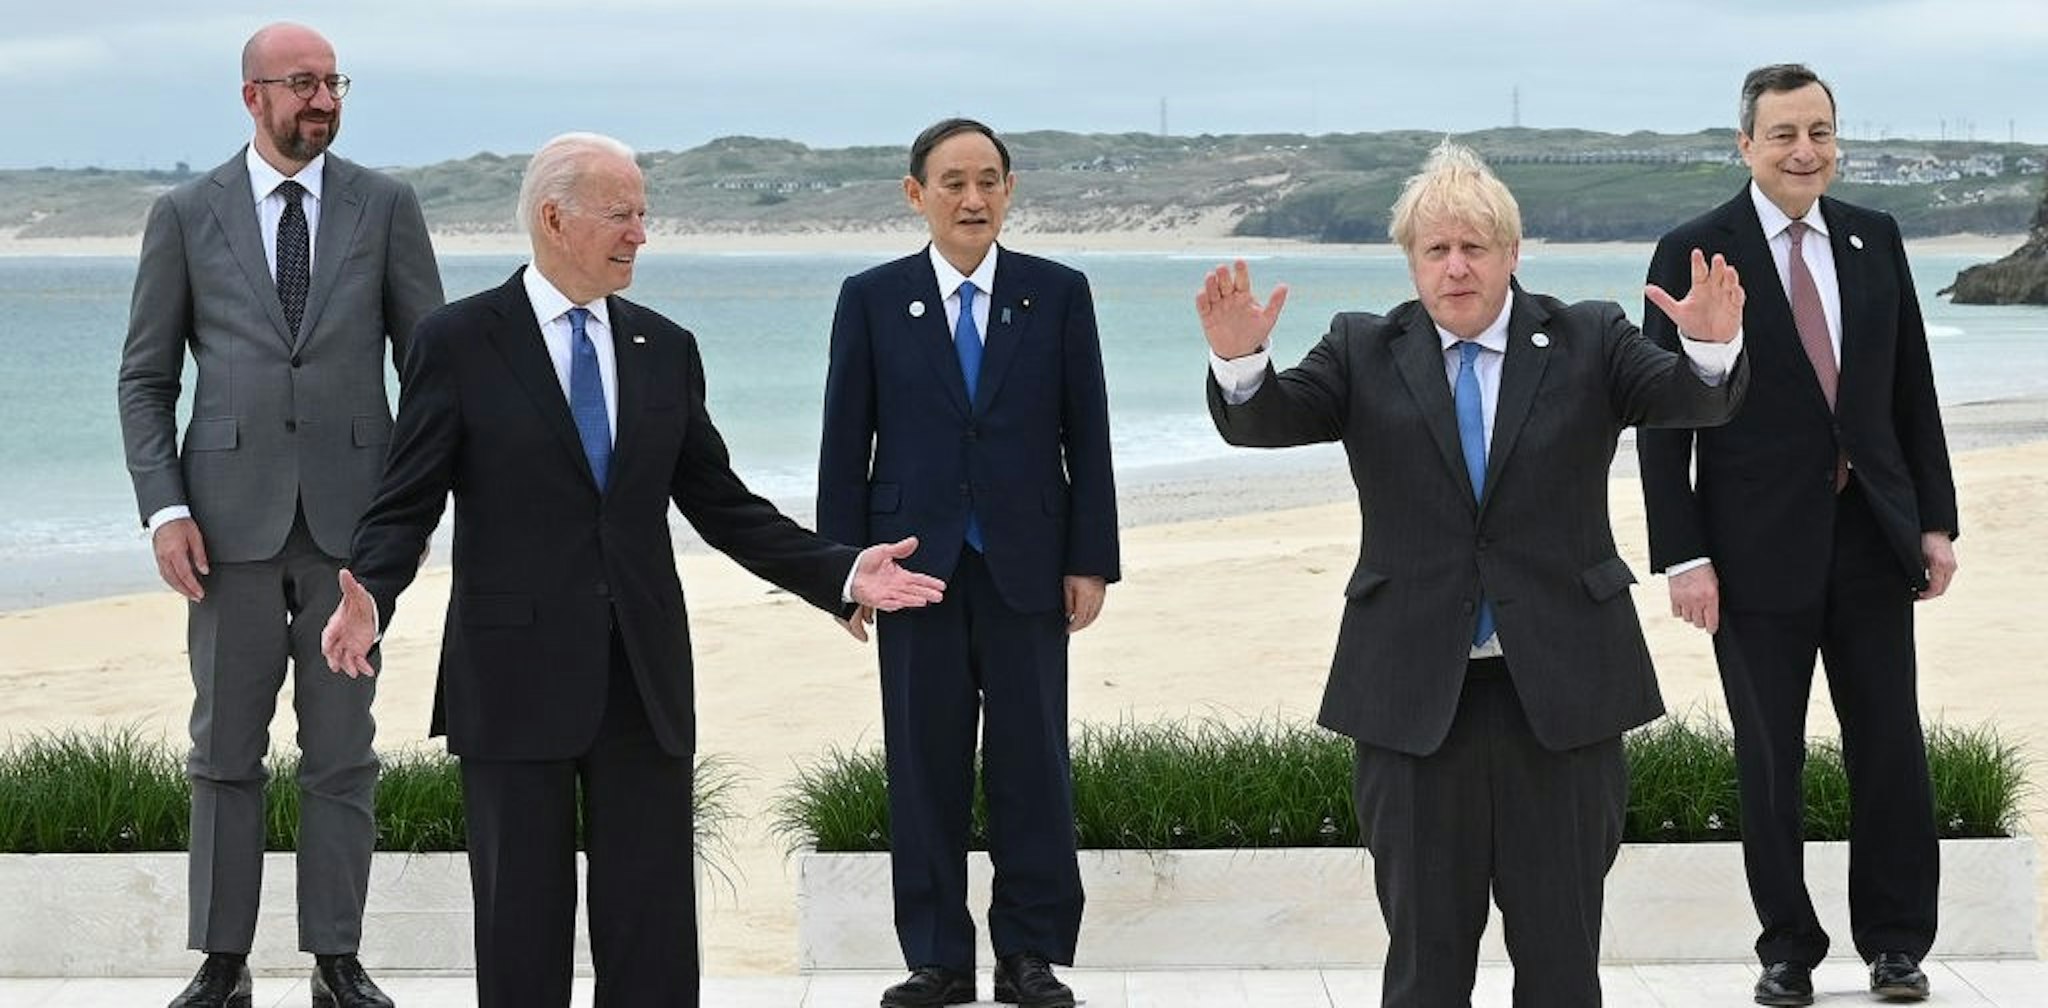 CARBIS BAY, CORNWALL - JUNE 11: (Alternate crop of #1233390711) (L-R) President of the European Council Charles Michel, US President Joe Biden, Japanese Prime Minister Yoshihide Suga, British Prime Minister Boris Johnson and Italian Prime Minister Mario Draghi pose for the Leaders official welcome and family photo during the G7 Summit In Carbis Bay, on June 11, 2021 in Carbis Bay, Cornwall. UK Prime Minister, Boris Johnson, hosts leaders from the USA, Japan, Germany, France, Italy and Canada at the G7 Summit. This year the UK has invited India, South Africa, and South Korea to attend the Leaders' Summit as guest countries as well as the EU. (Photo by